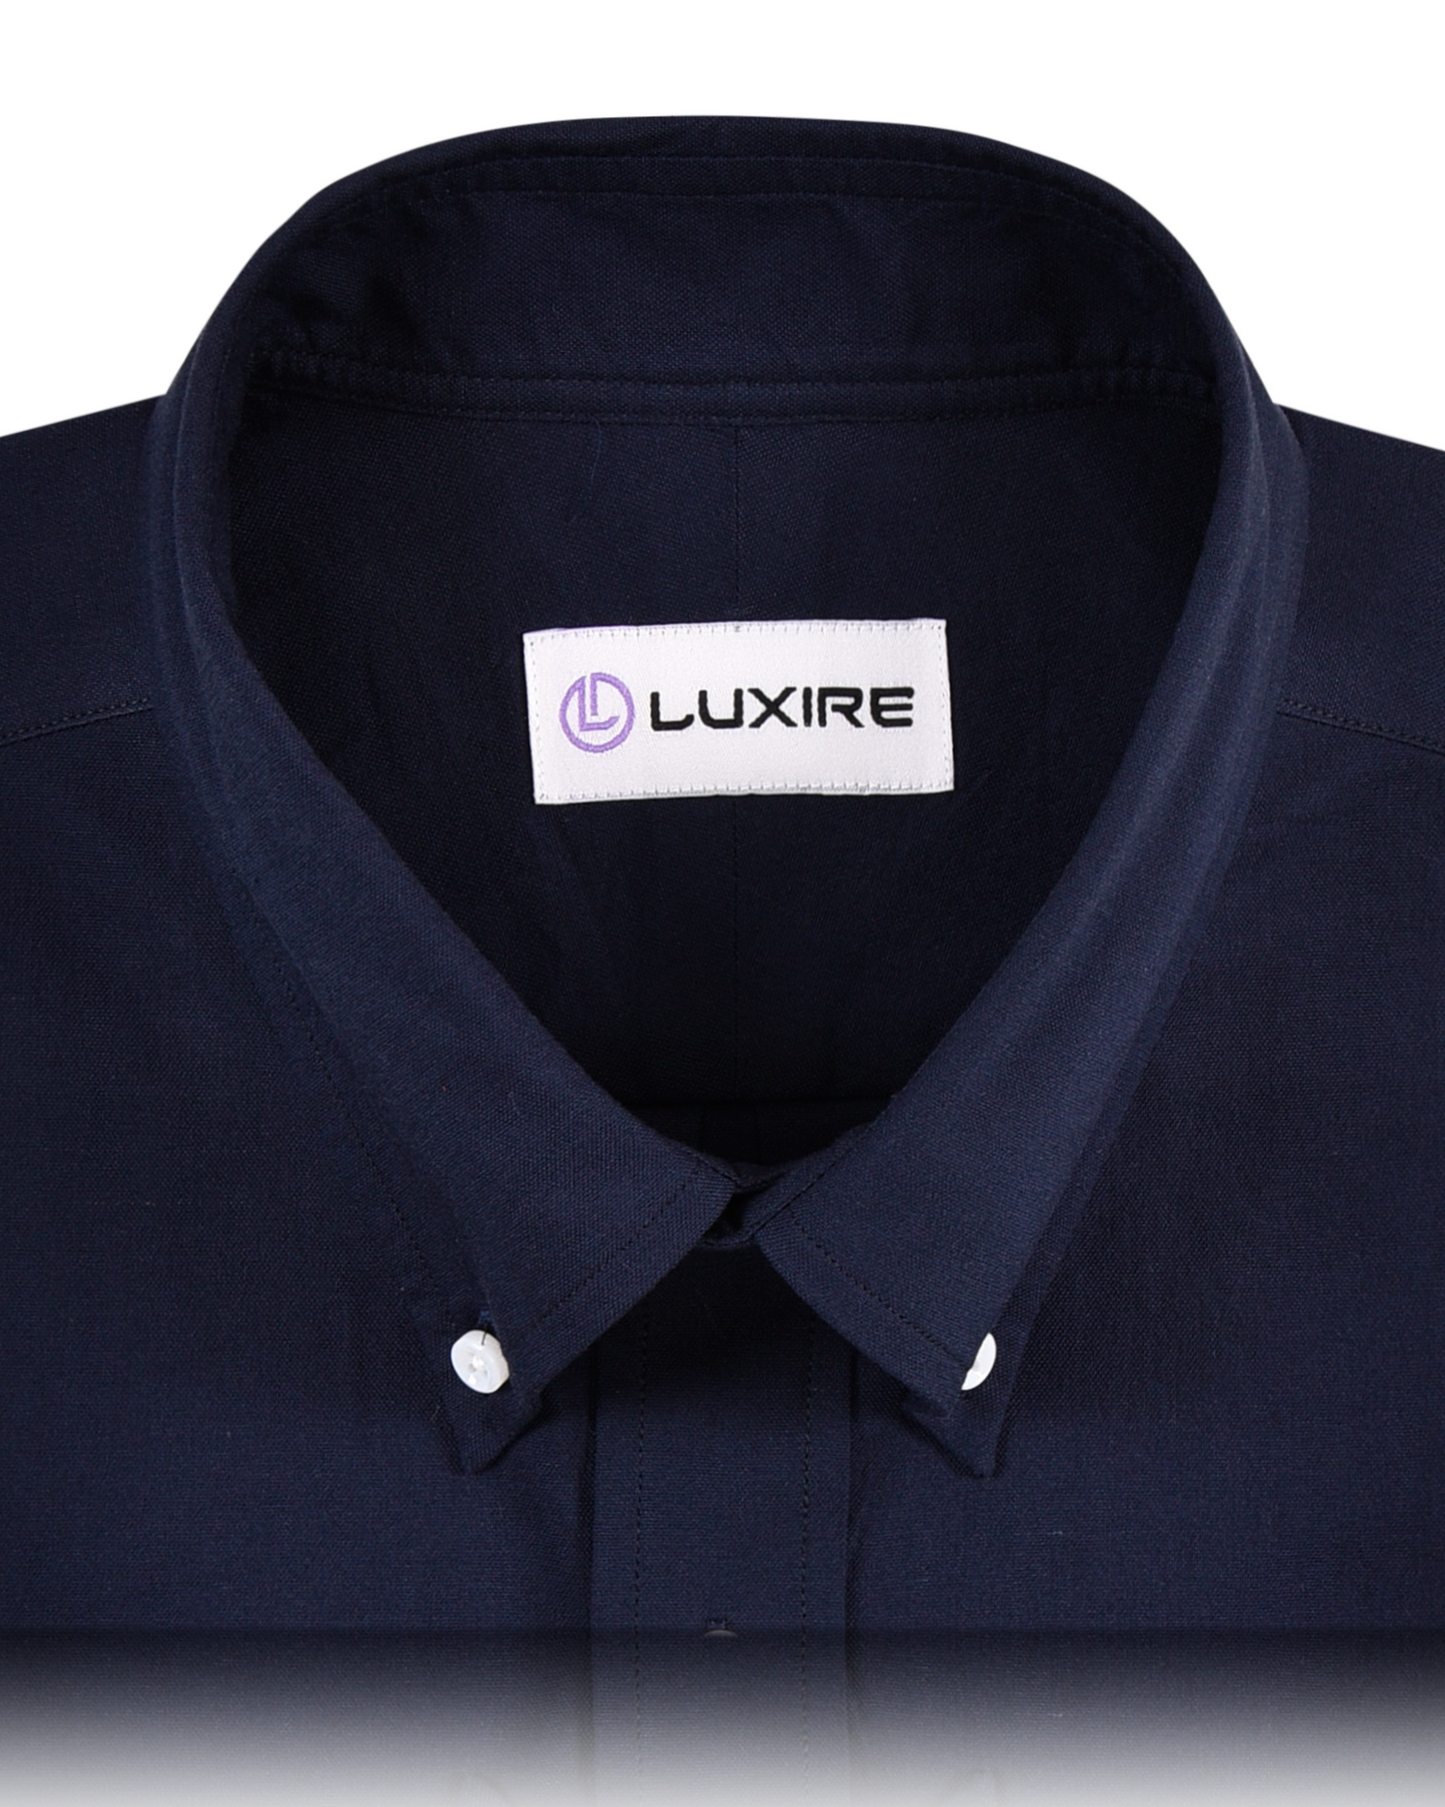 Collar of the custom oxford shirt for men by Luxire in navy